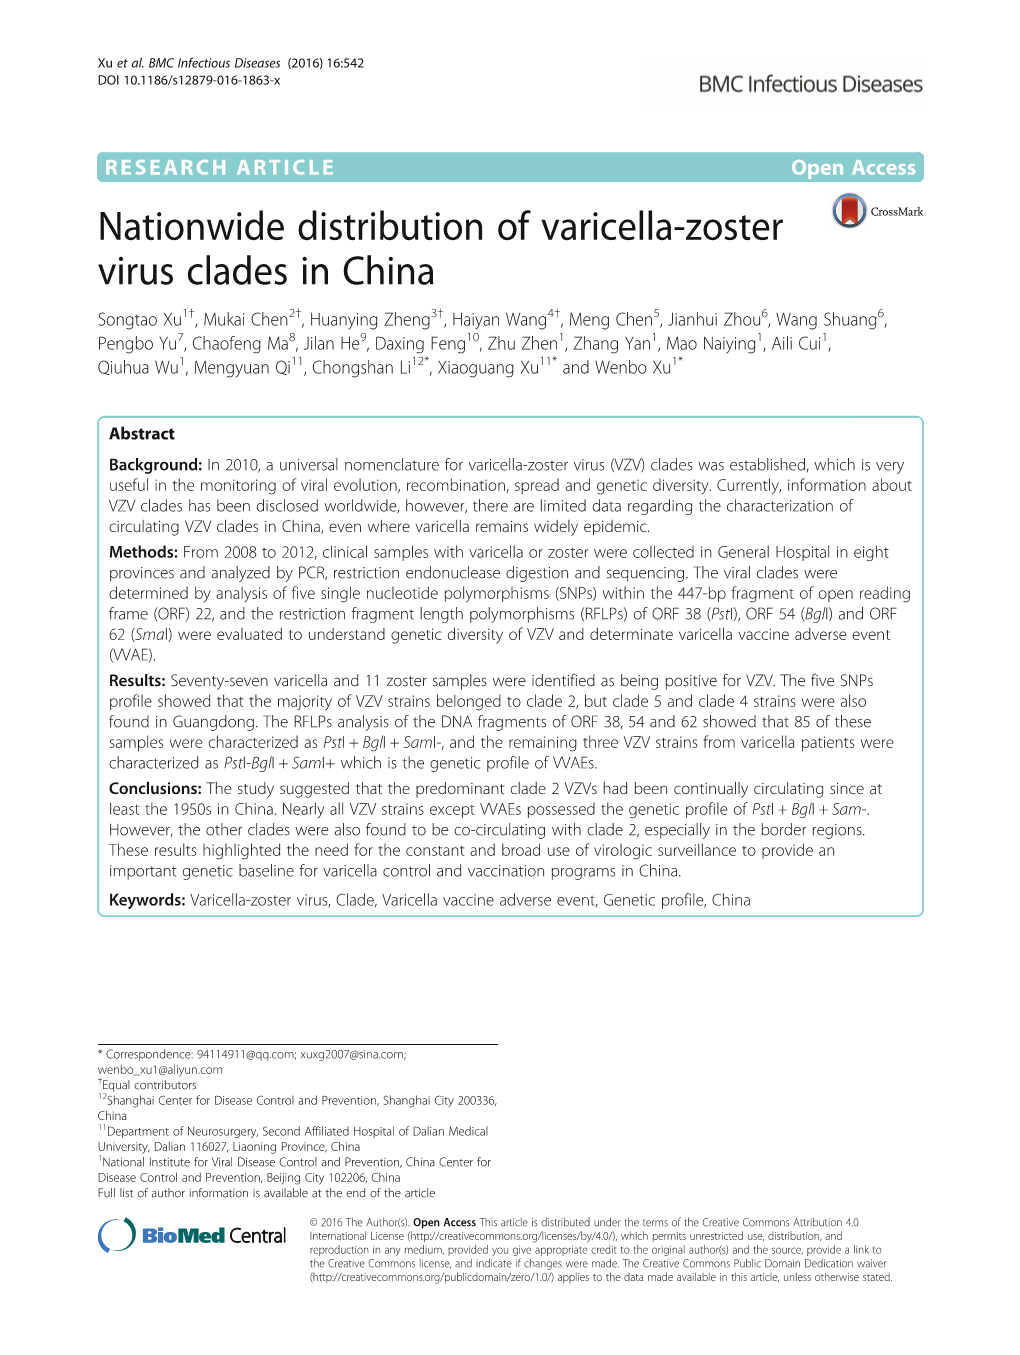 Nationwide Distribution of Varicella-Zoster Virus Clades in China